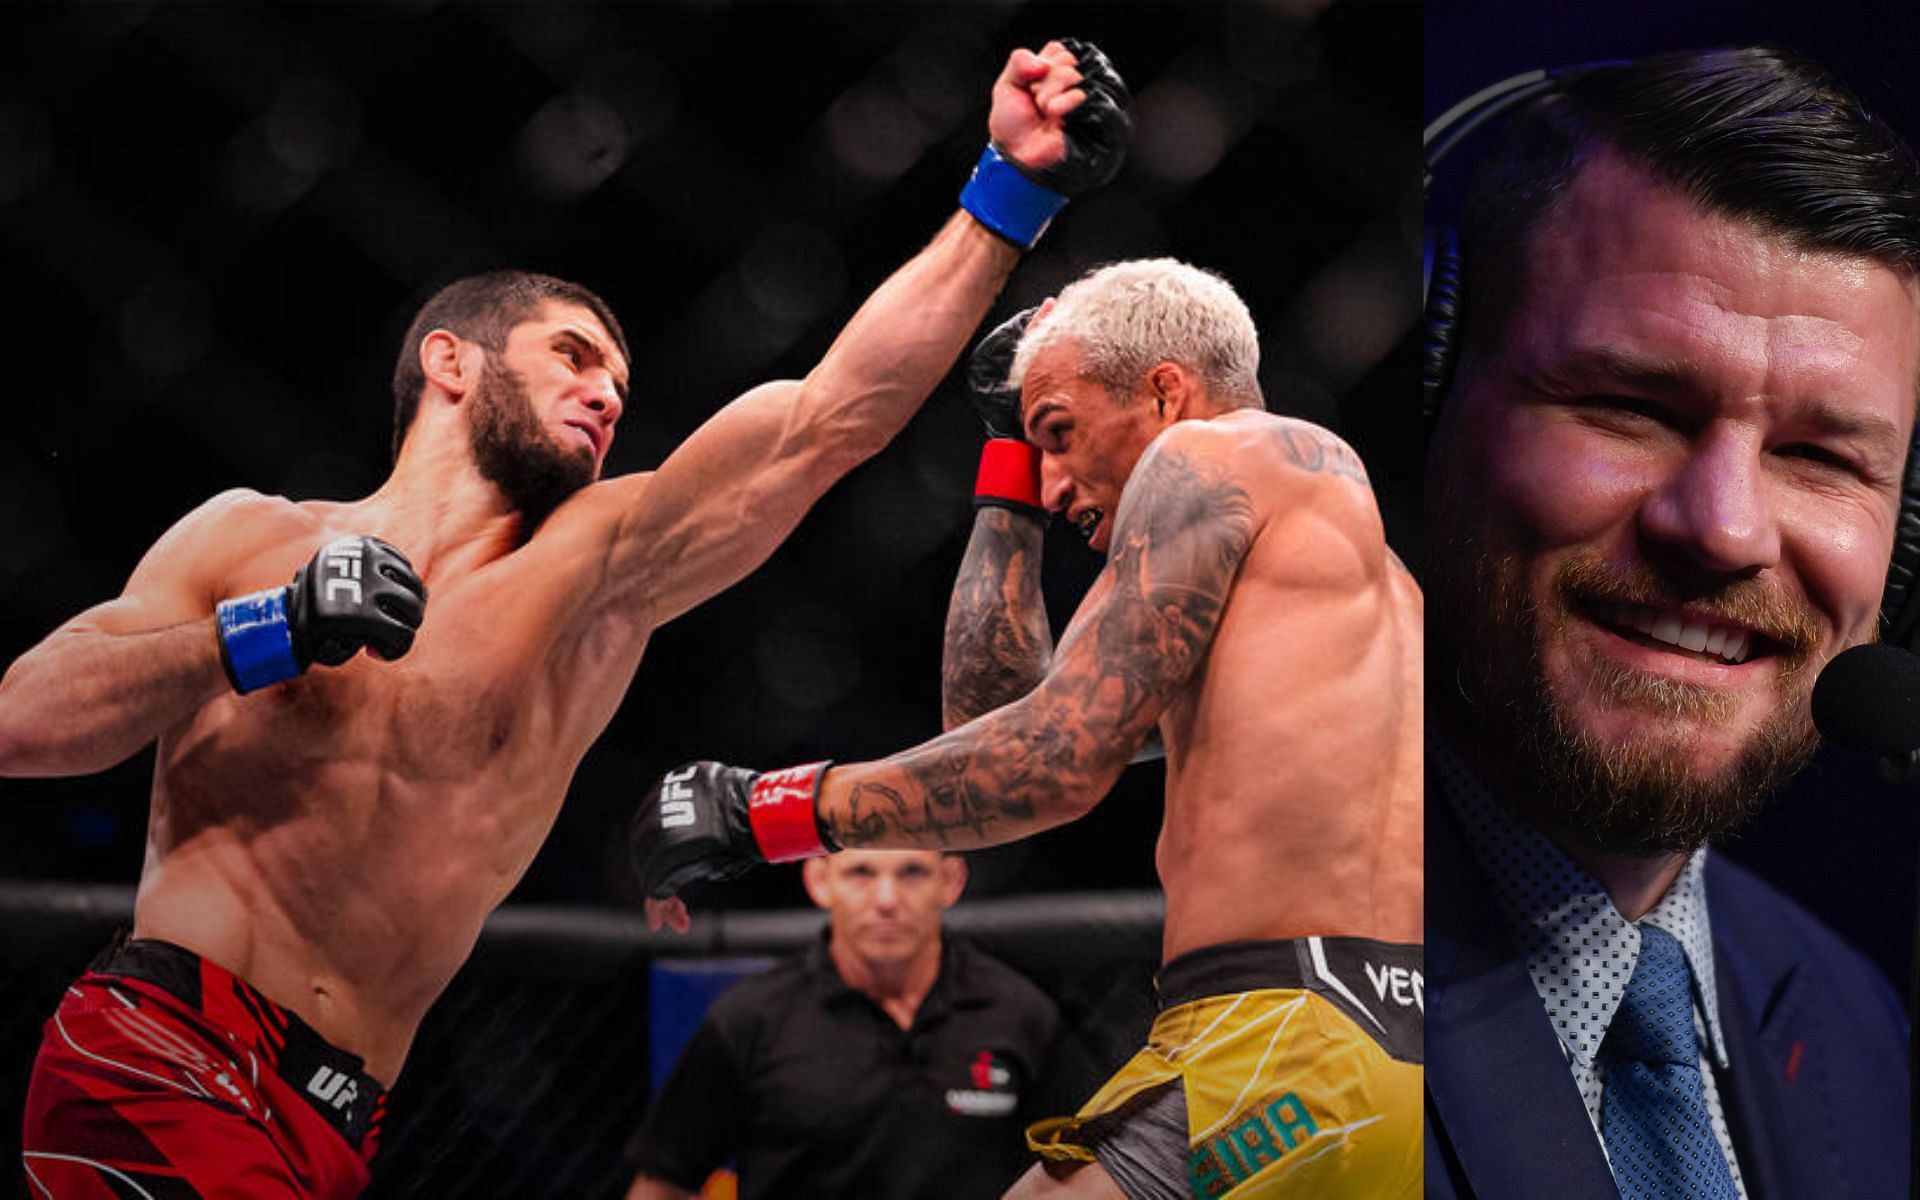 Charles Oliveira vs Islam Makhachev (left) and Michael Bisping (right). [via UFC and Getty Images]